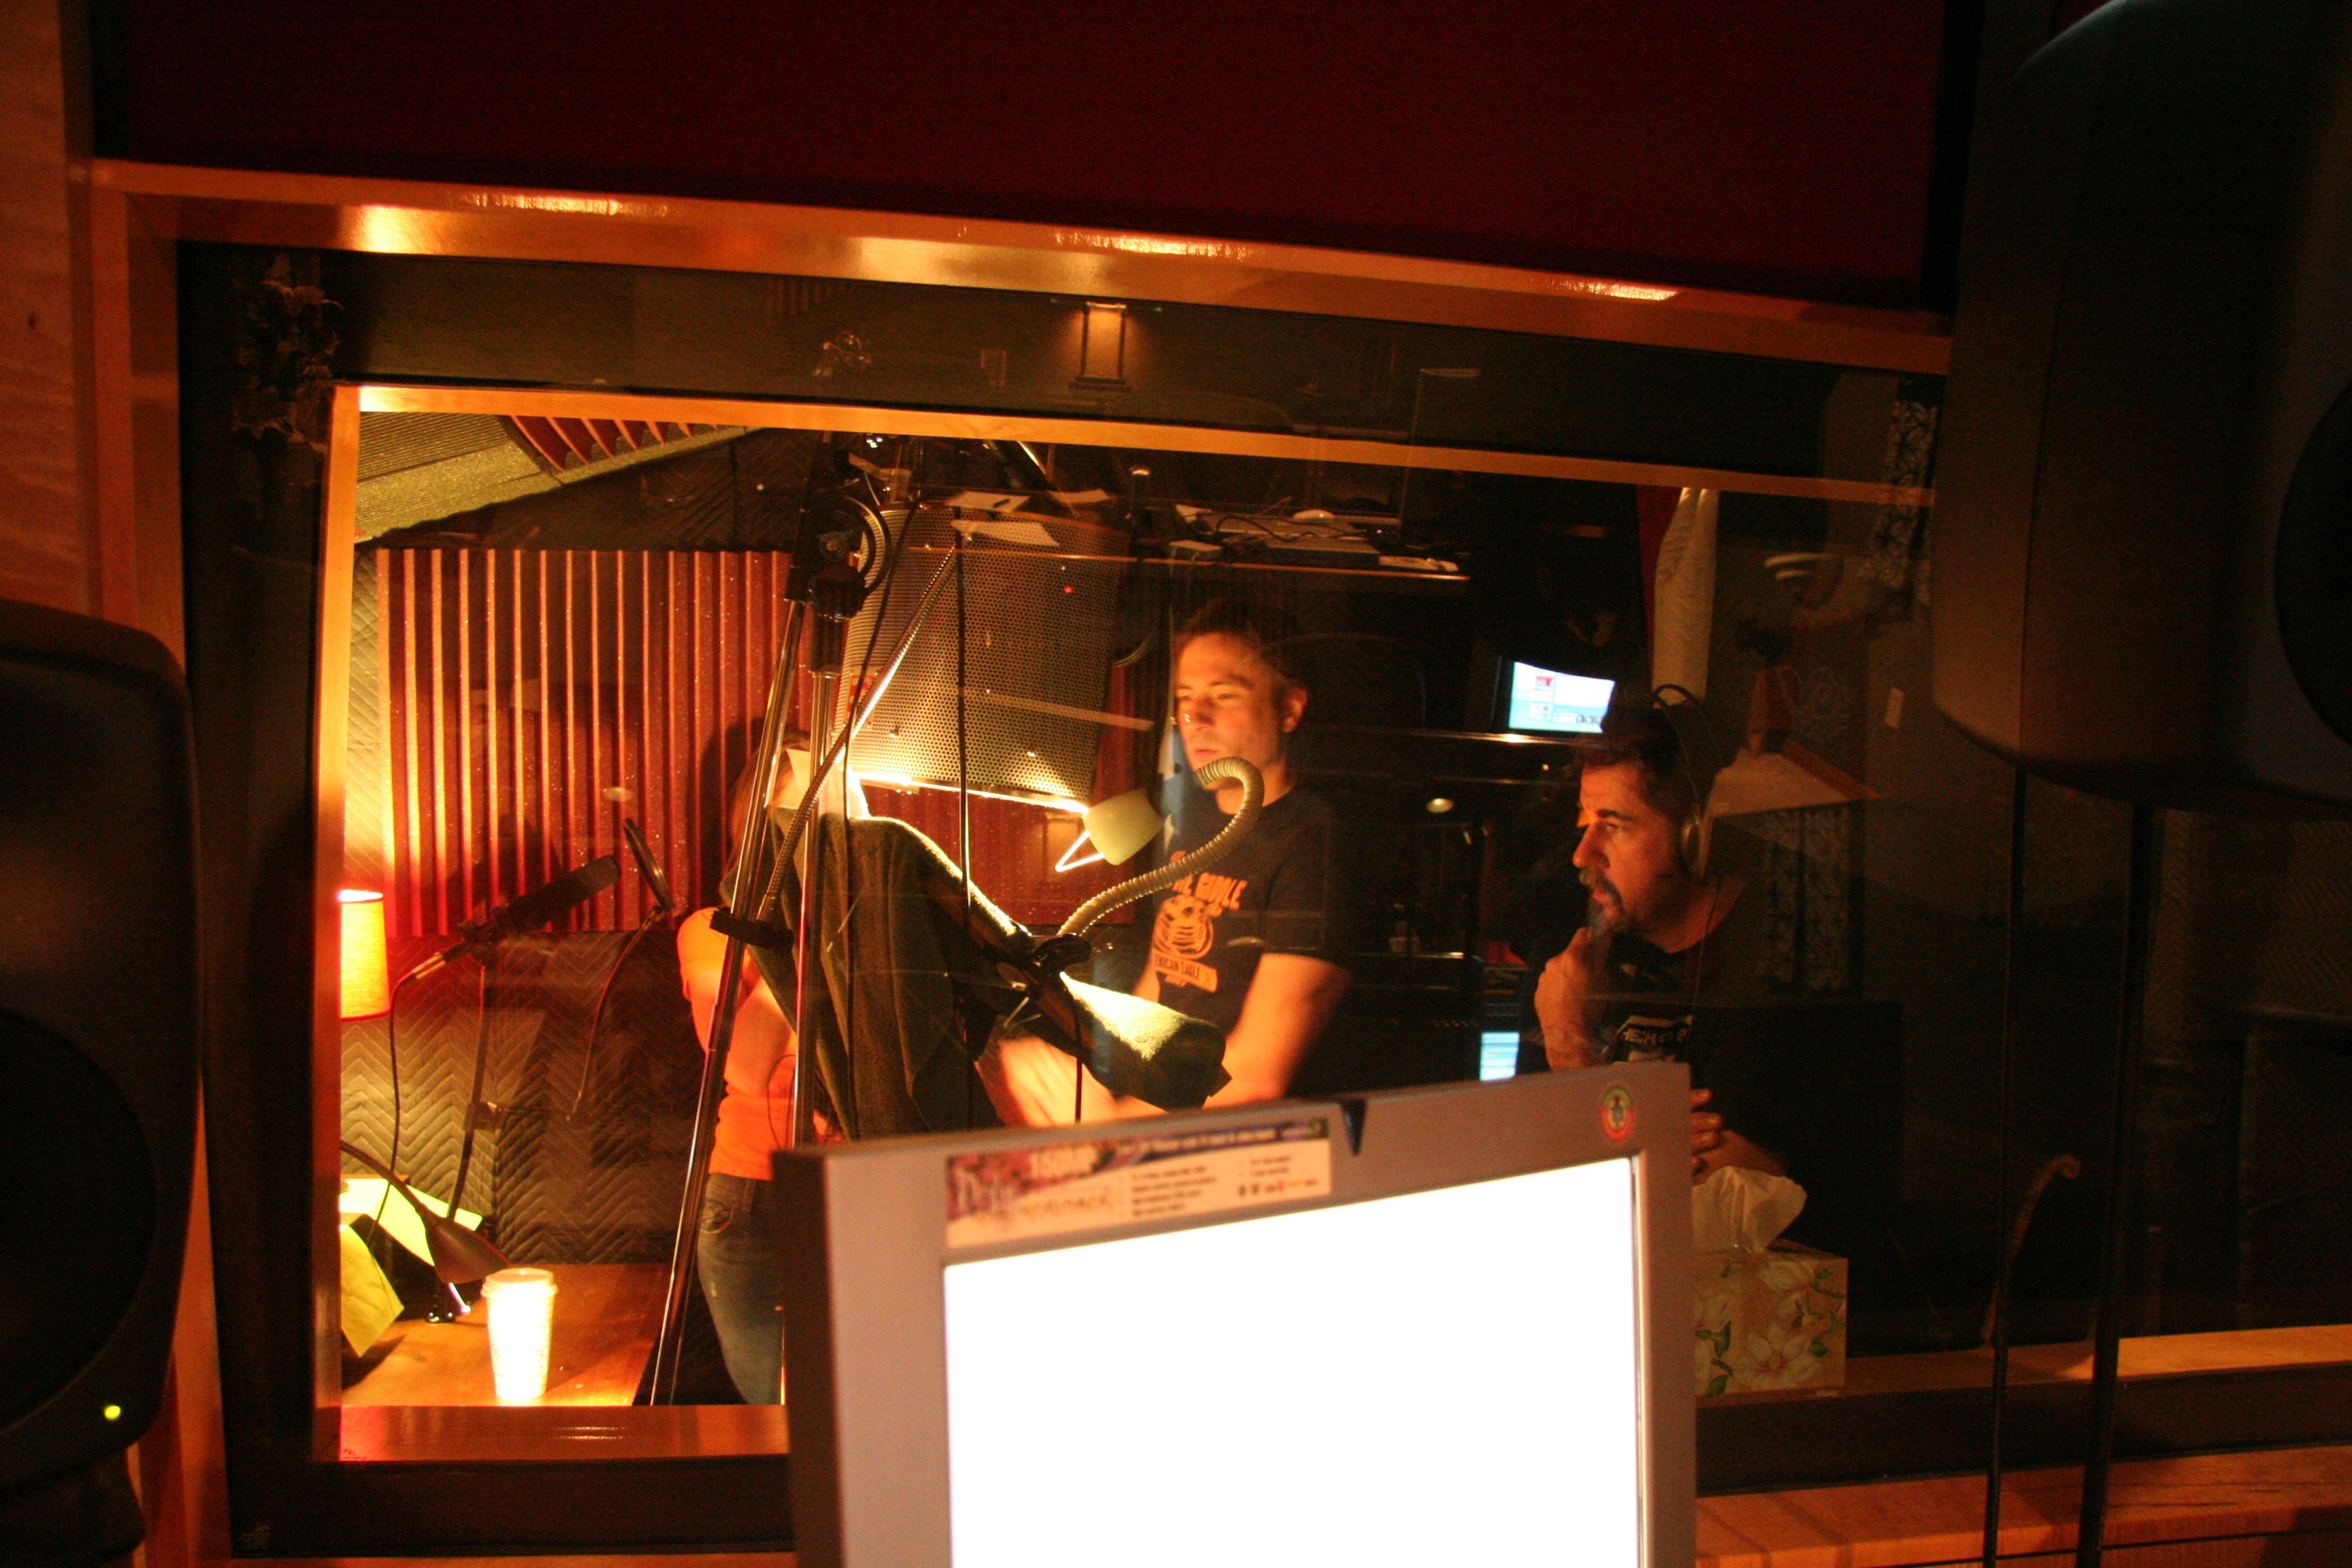 Trail of Crumbs post production sound session in Los Angeles: Robert McAtee speaks to Jeff Swarthout (Woody Truman) and Molly Leland (Wendy) before the recording of a phone conversation between their characters.